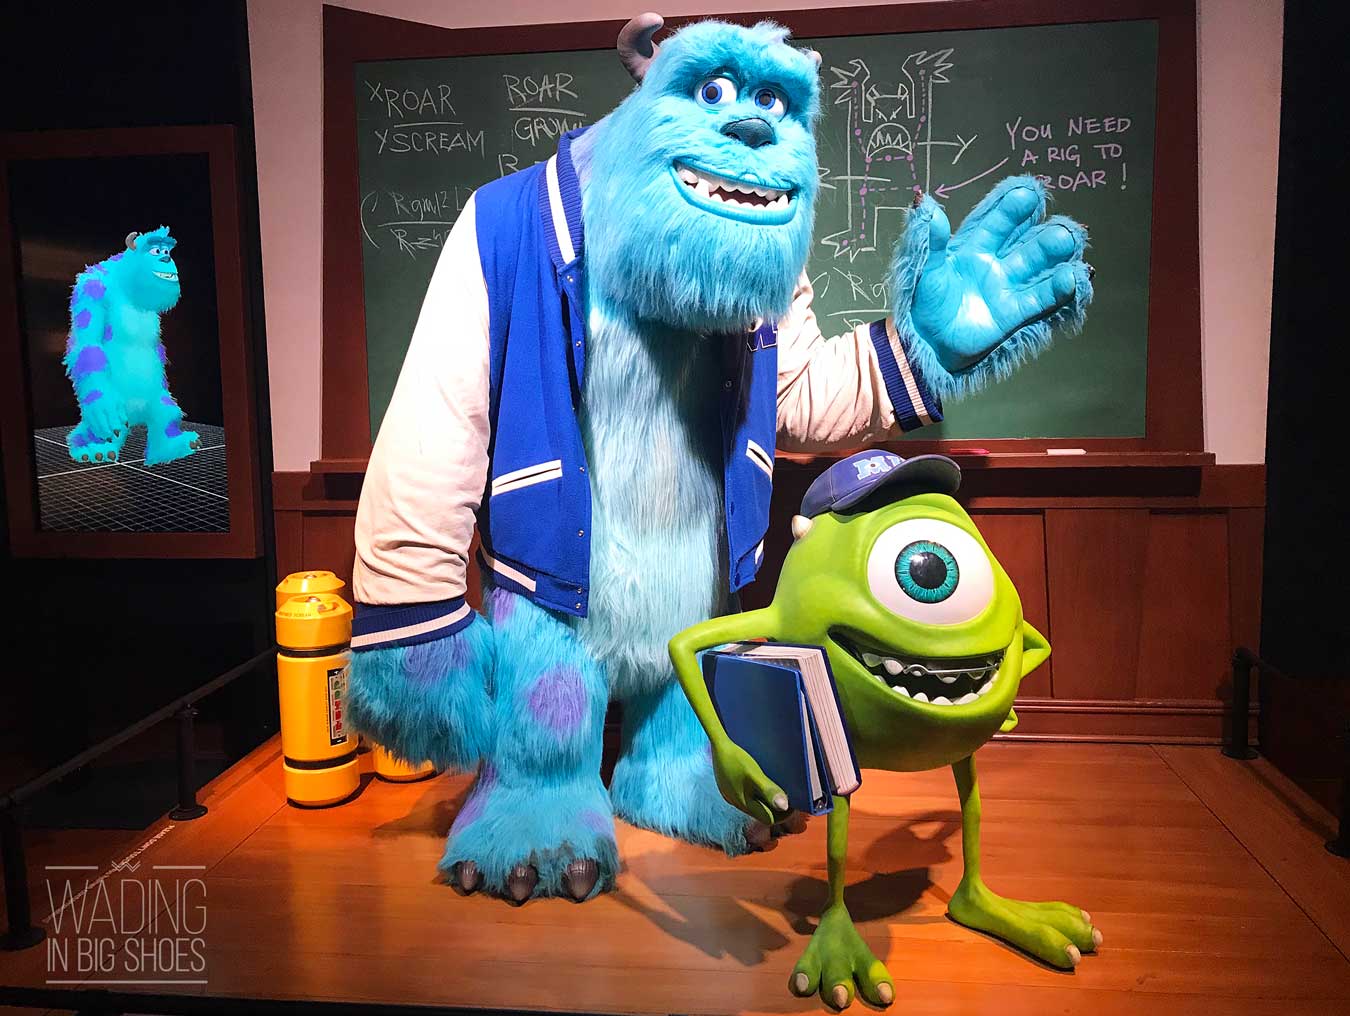 Dose Of Disney: The Science Behind Pixar At The Henry Ford Museum [via Wading in Big Shoes]